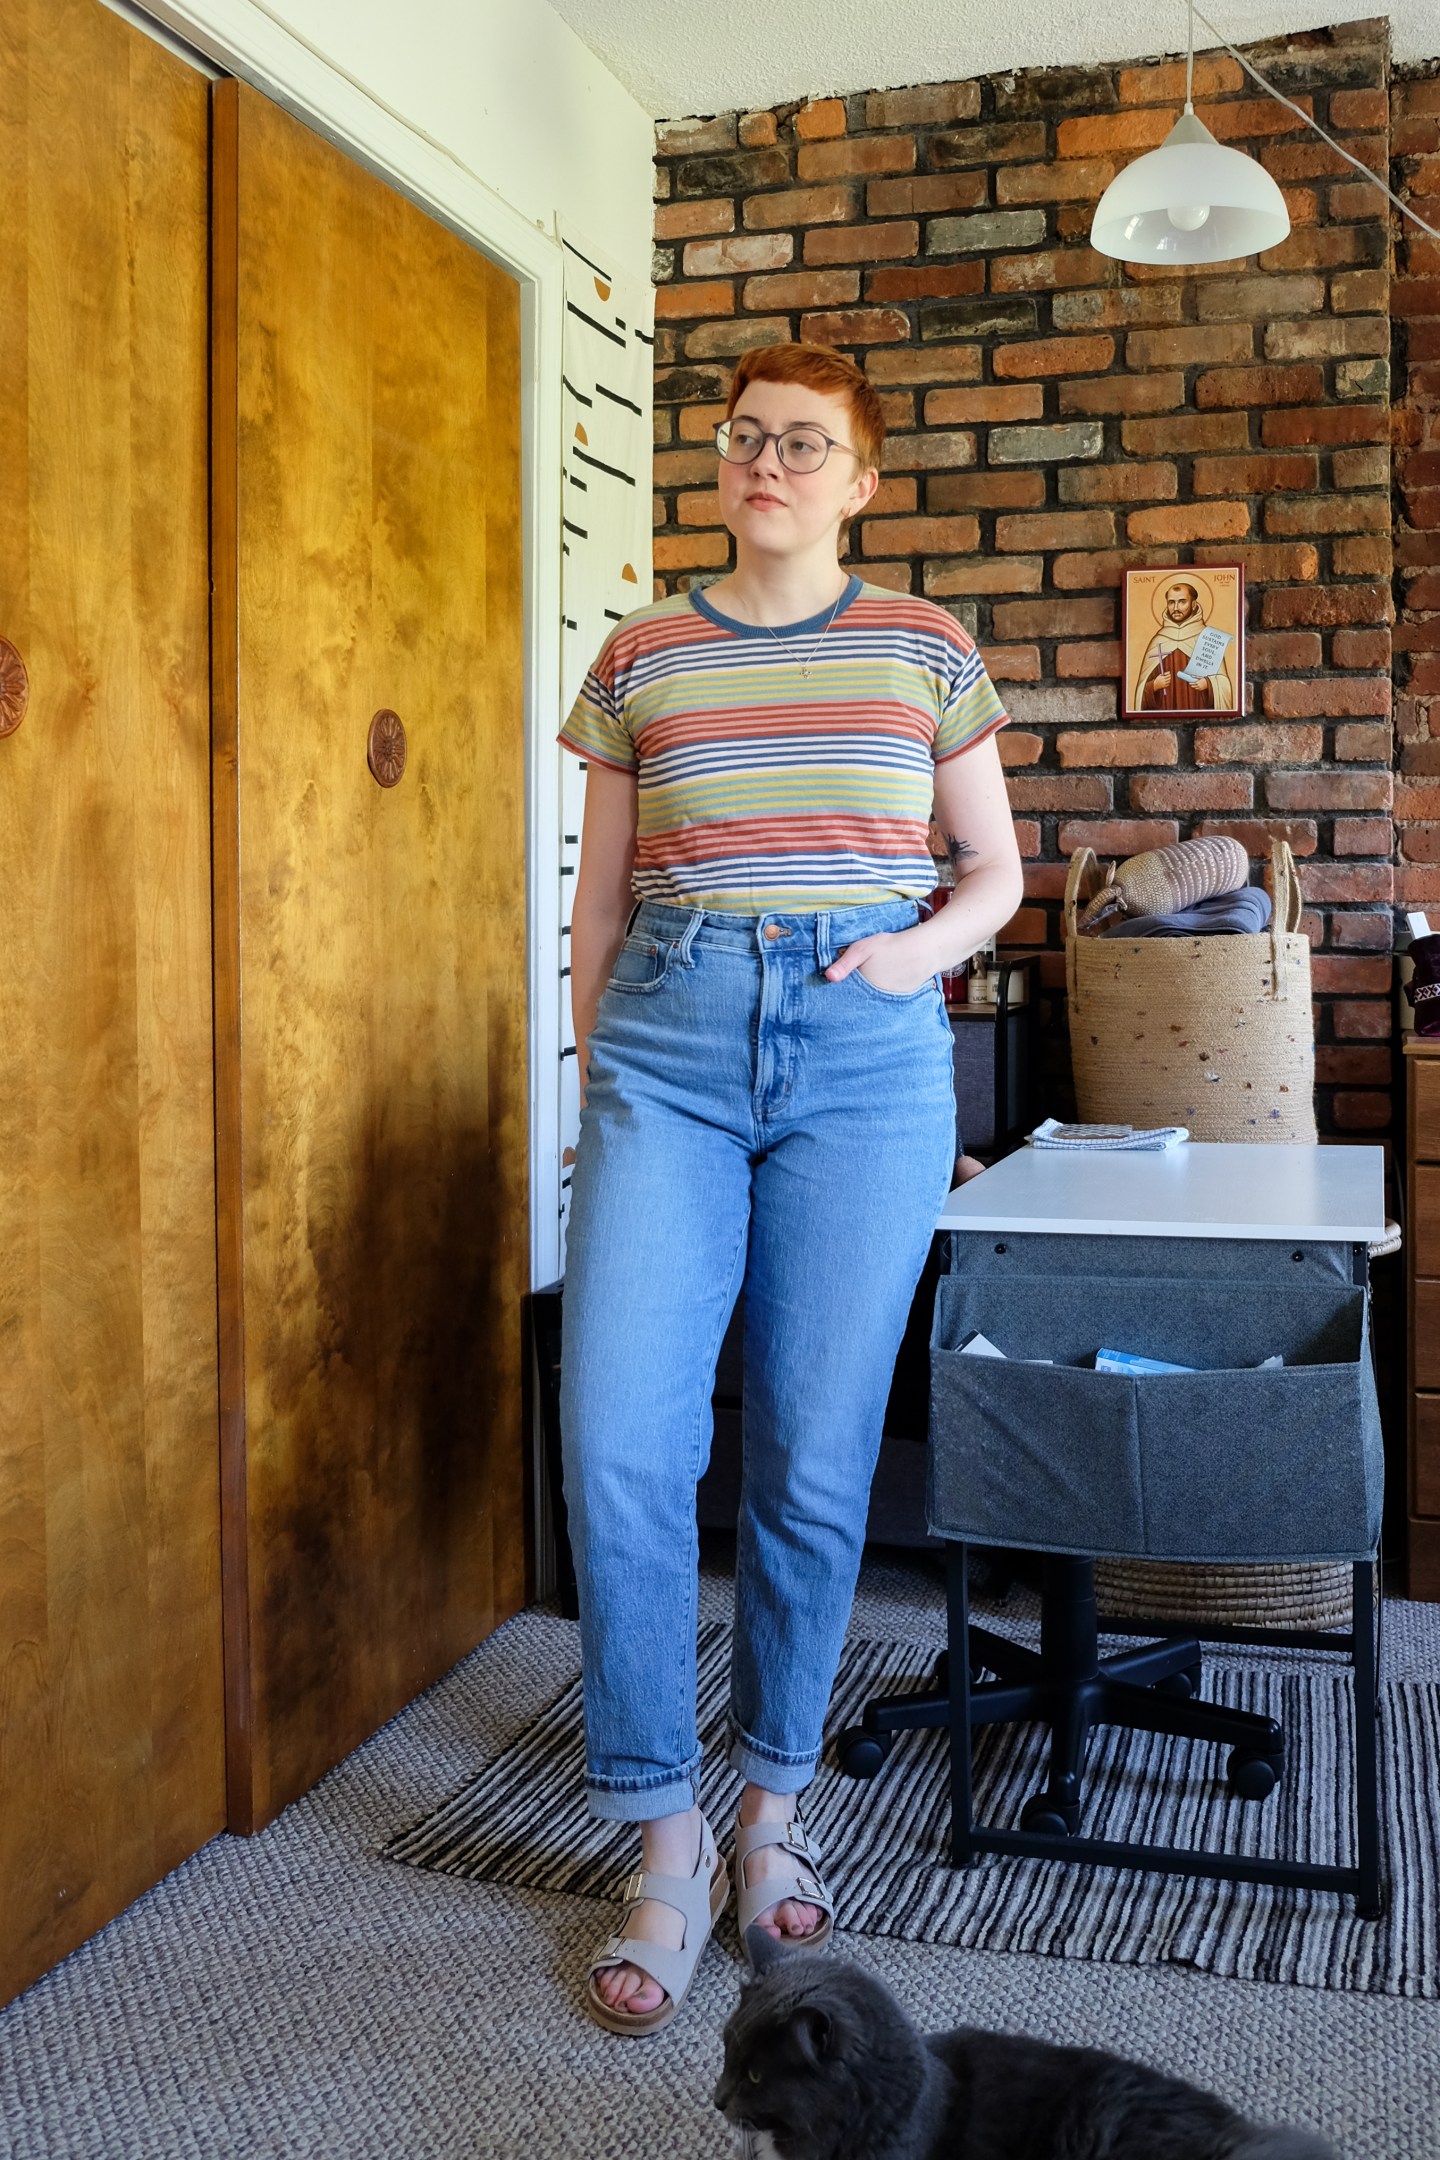 Leah stands in her bedroom wearing a striped shirt, light wash jeans, and sandals - Summer Favorites